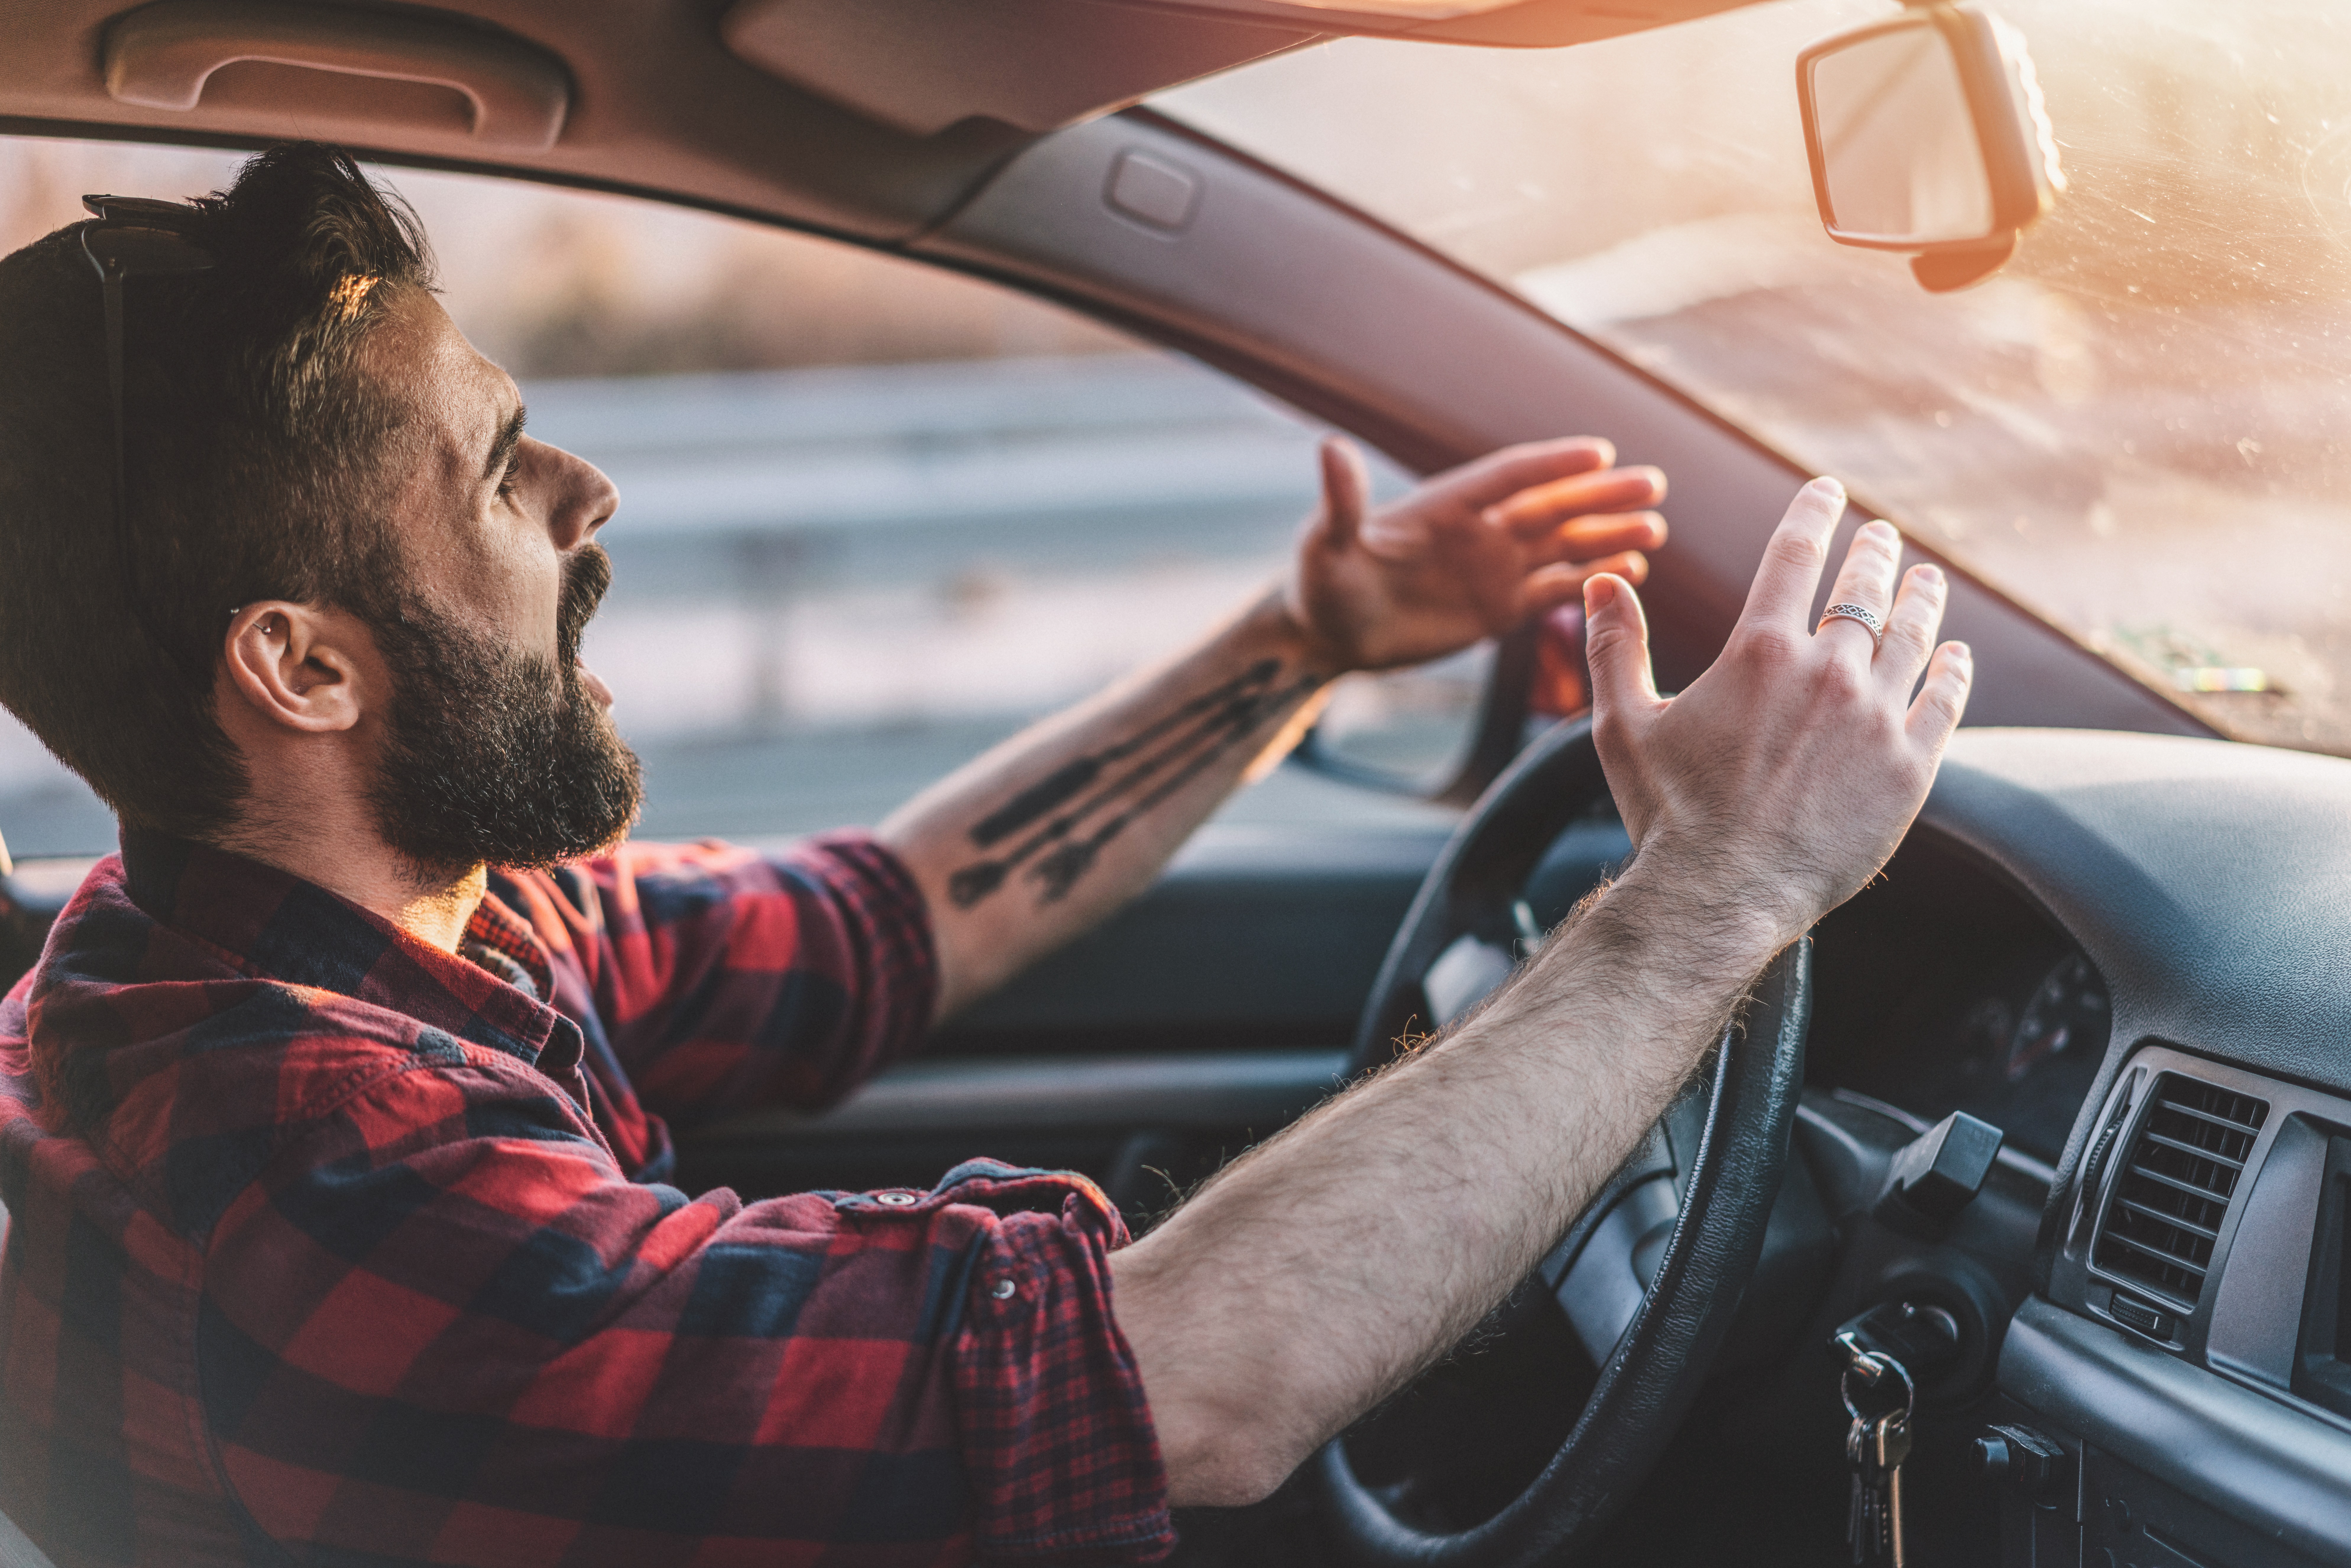 Listening to music while driving may help calm the heart